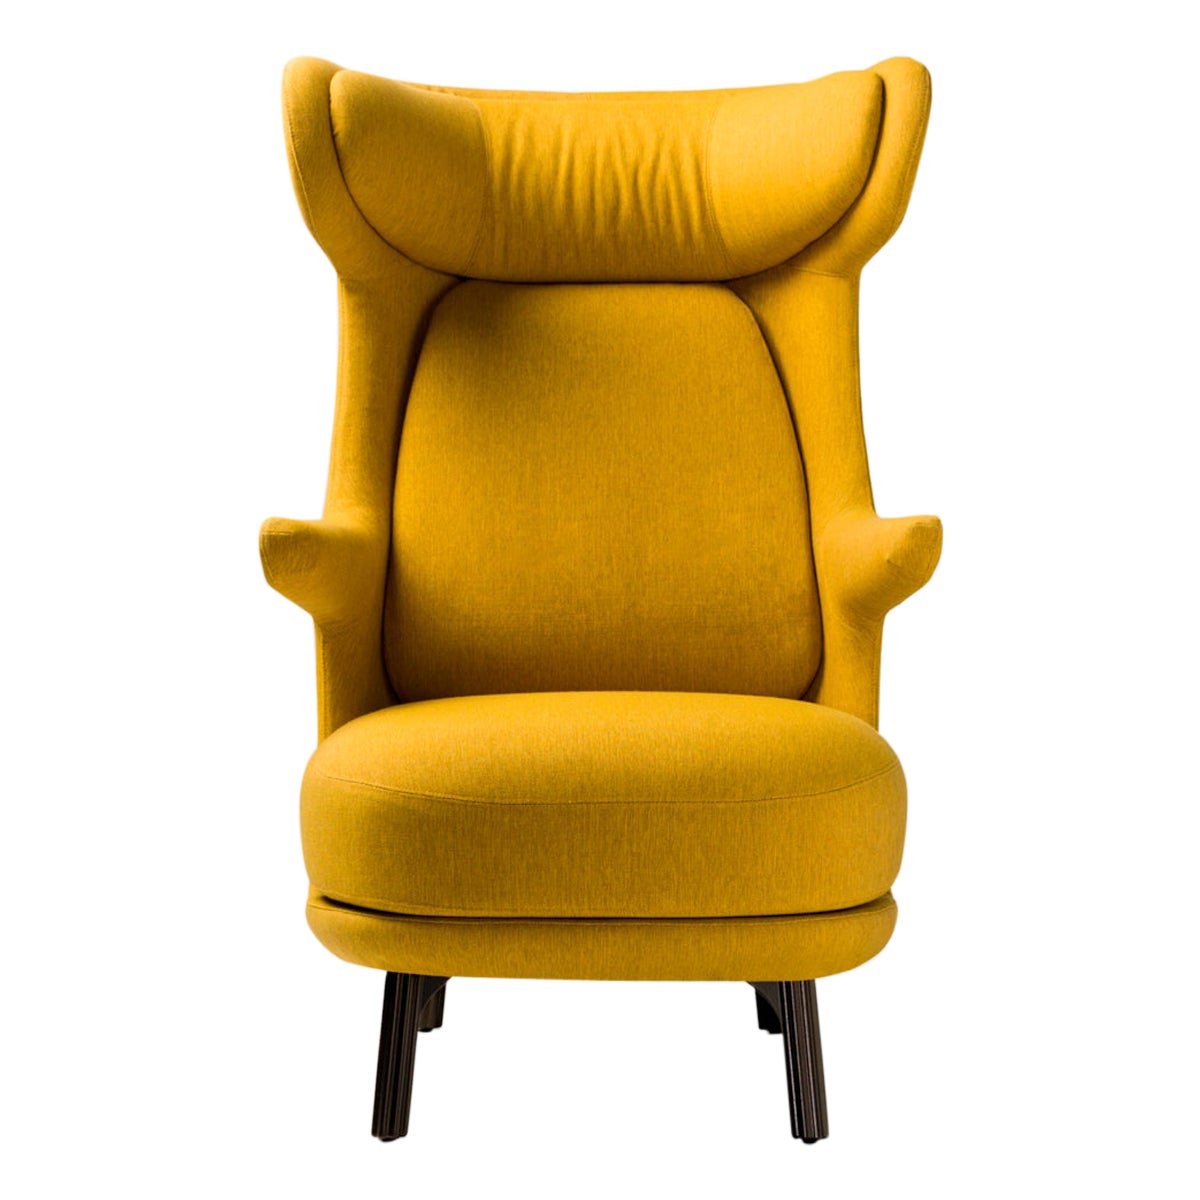 Jaime Hayon, Monocolor in Yellow Fabric Upholstery Dino Armchair For Sale